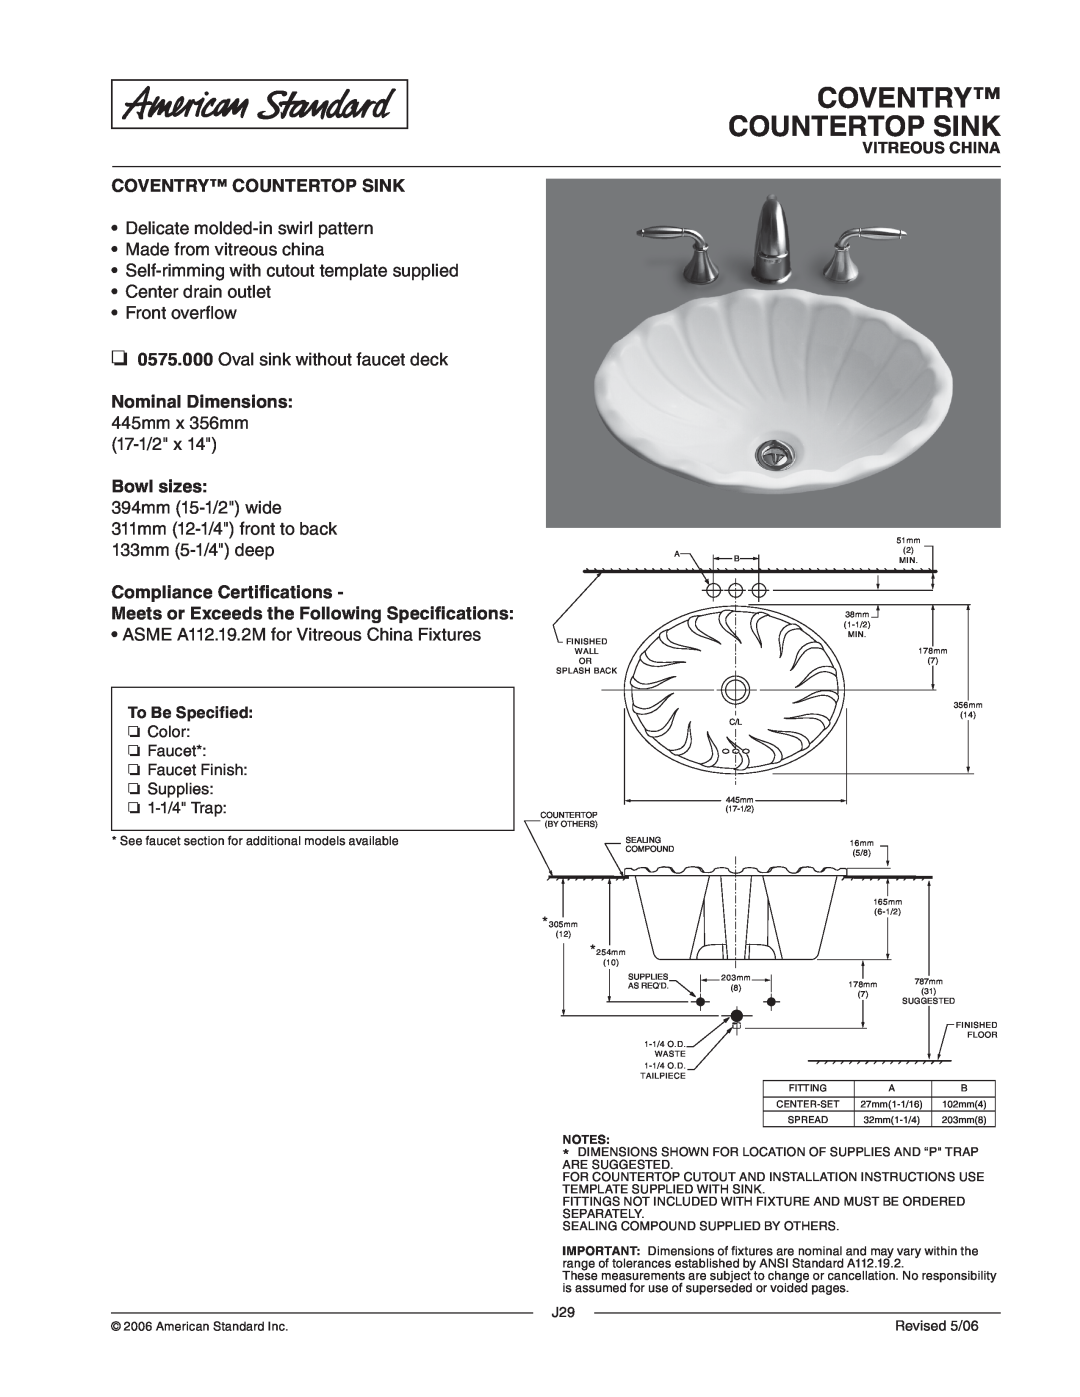 American Standard 0575.000 dimensions Coventry Countertop Sink, Delicate molded-inswirl pattern, Made from vitreous china 